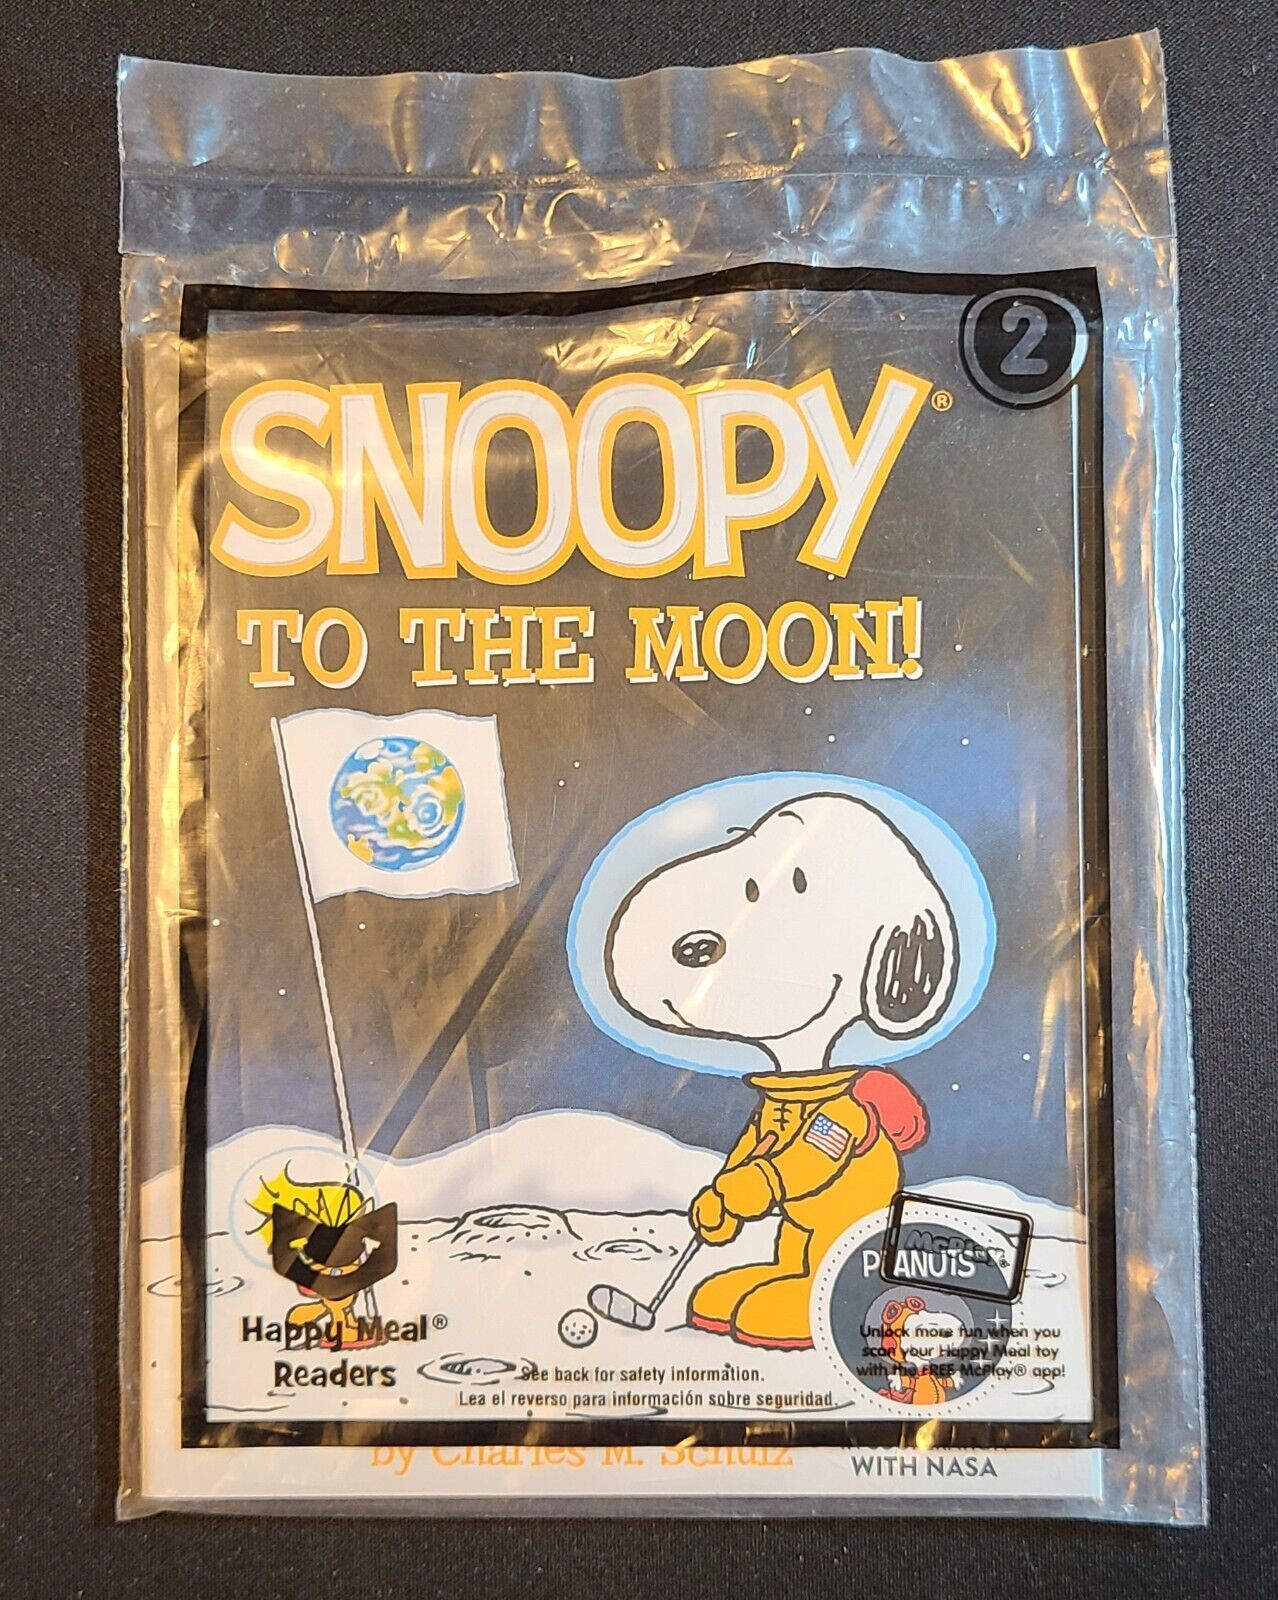 SNOOPY TO THE MOON! 2019 McDonalds Happy Meal Readers Peanuts Sealed 2 Misc Toy - Hobby Gems